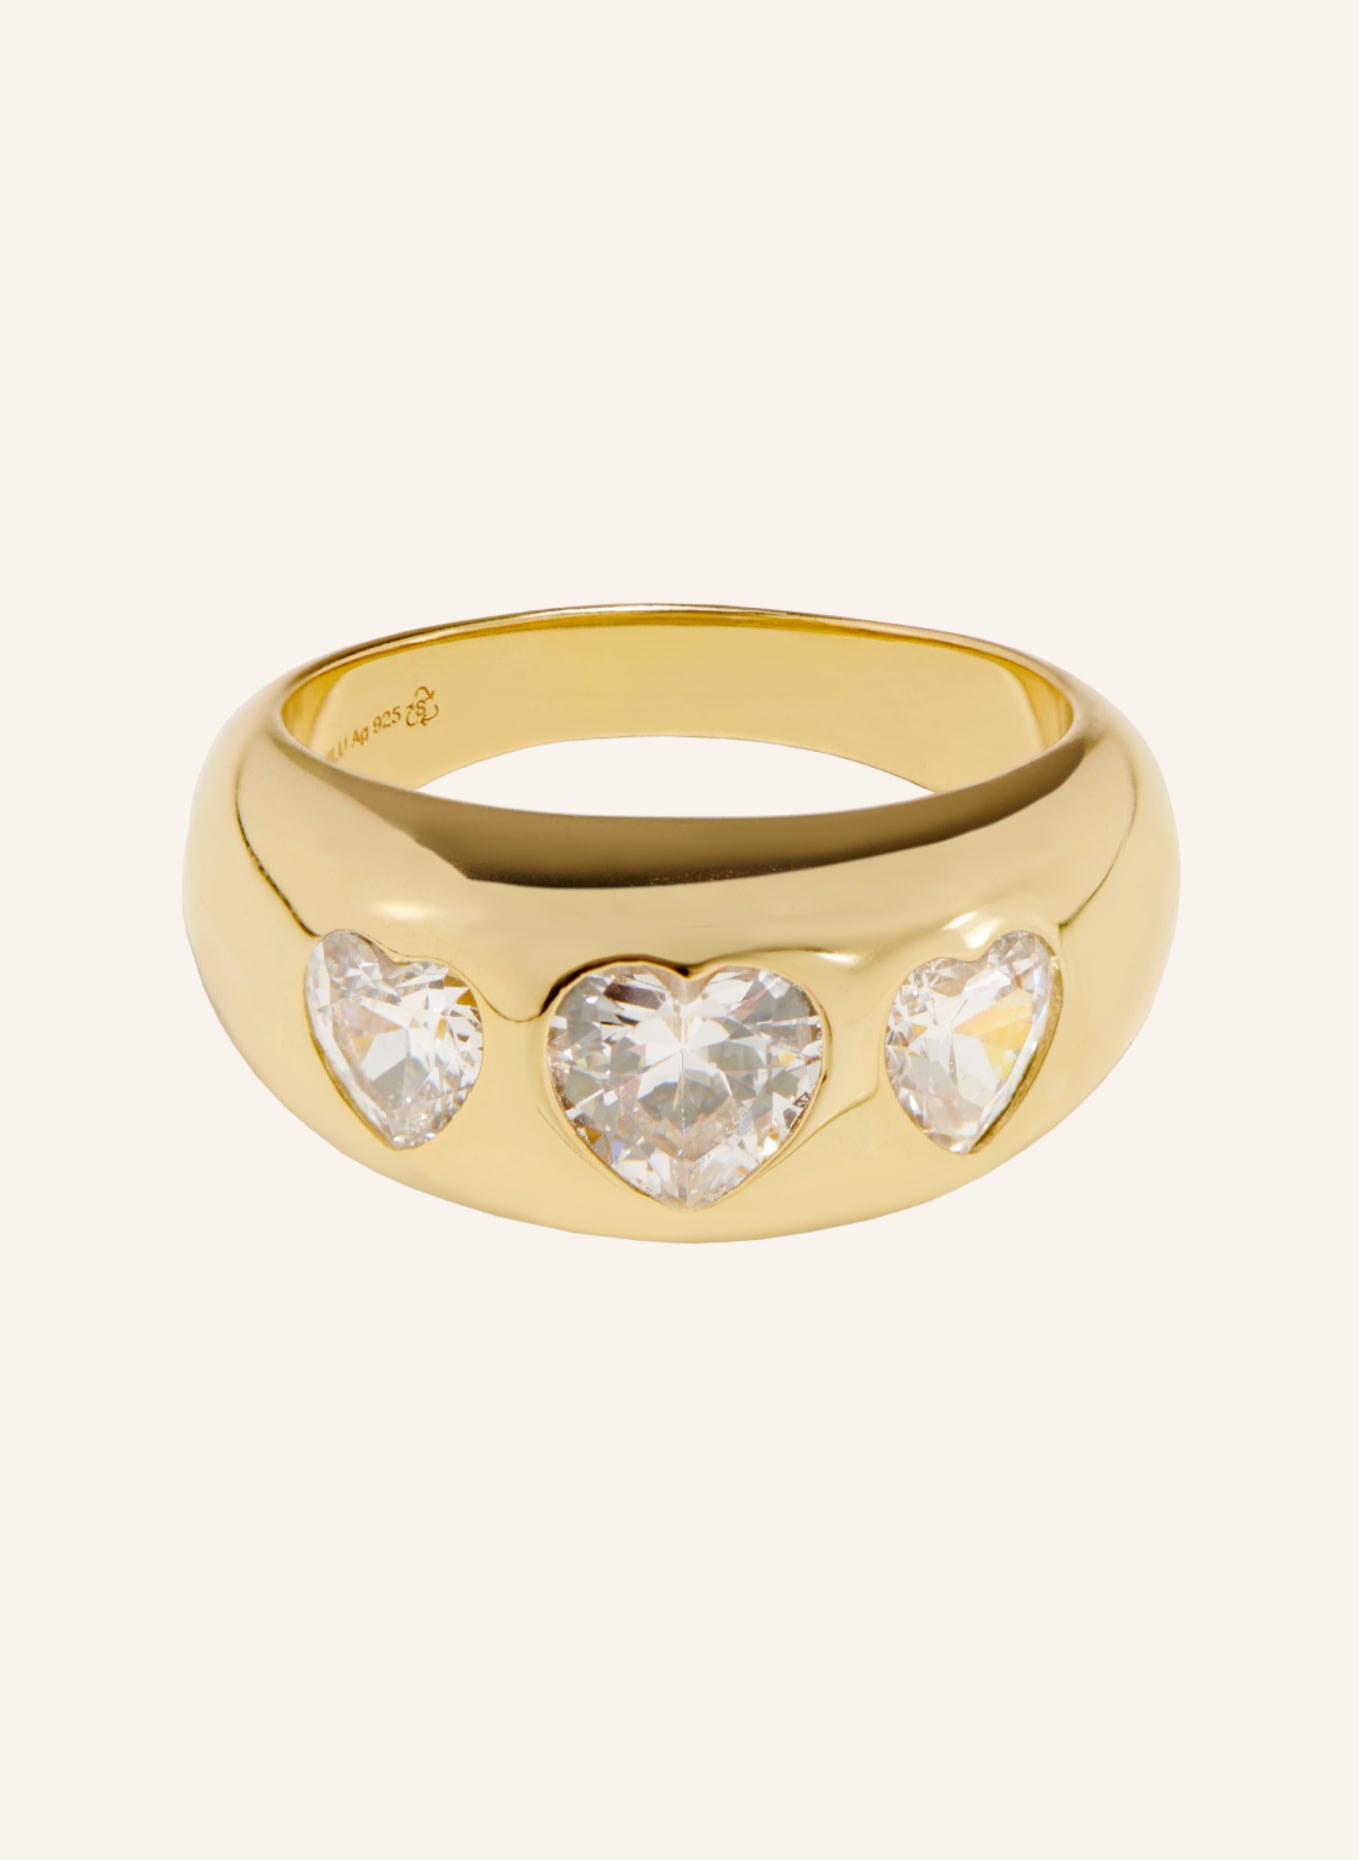 OHH LUILU Ringe HEART DOME RING by GLAMBOU, Farbe: GOLD (Bild 1)